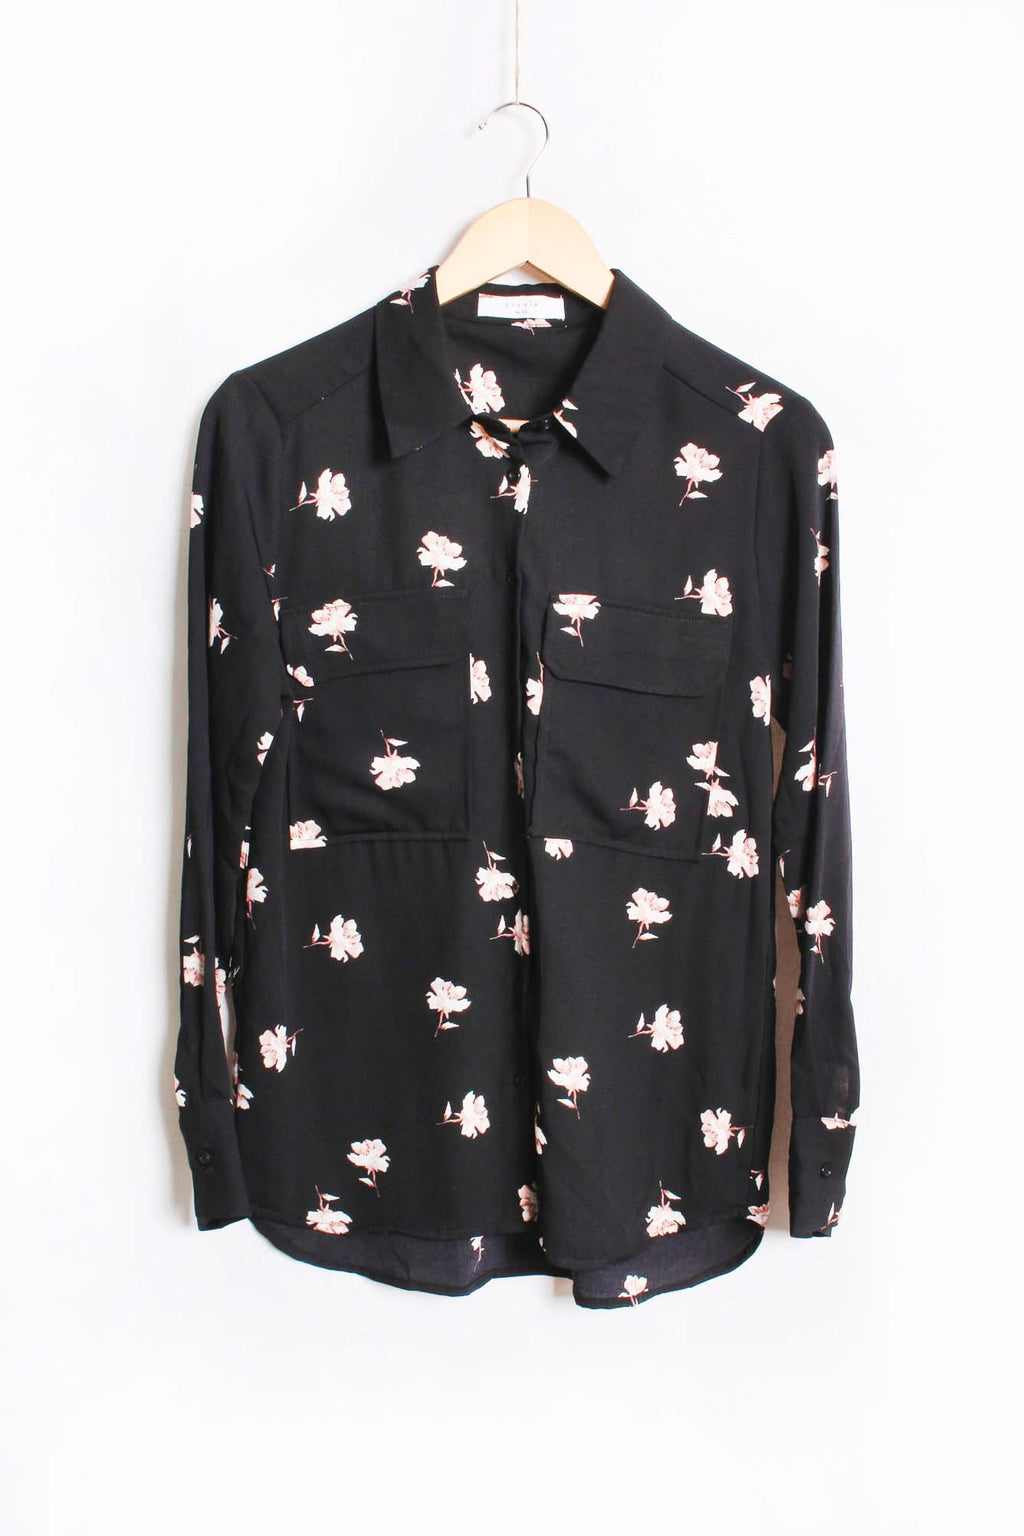 Women's Long Sleeve Button Down Floral Top